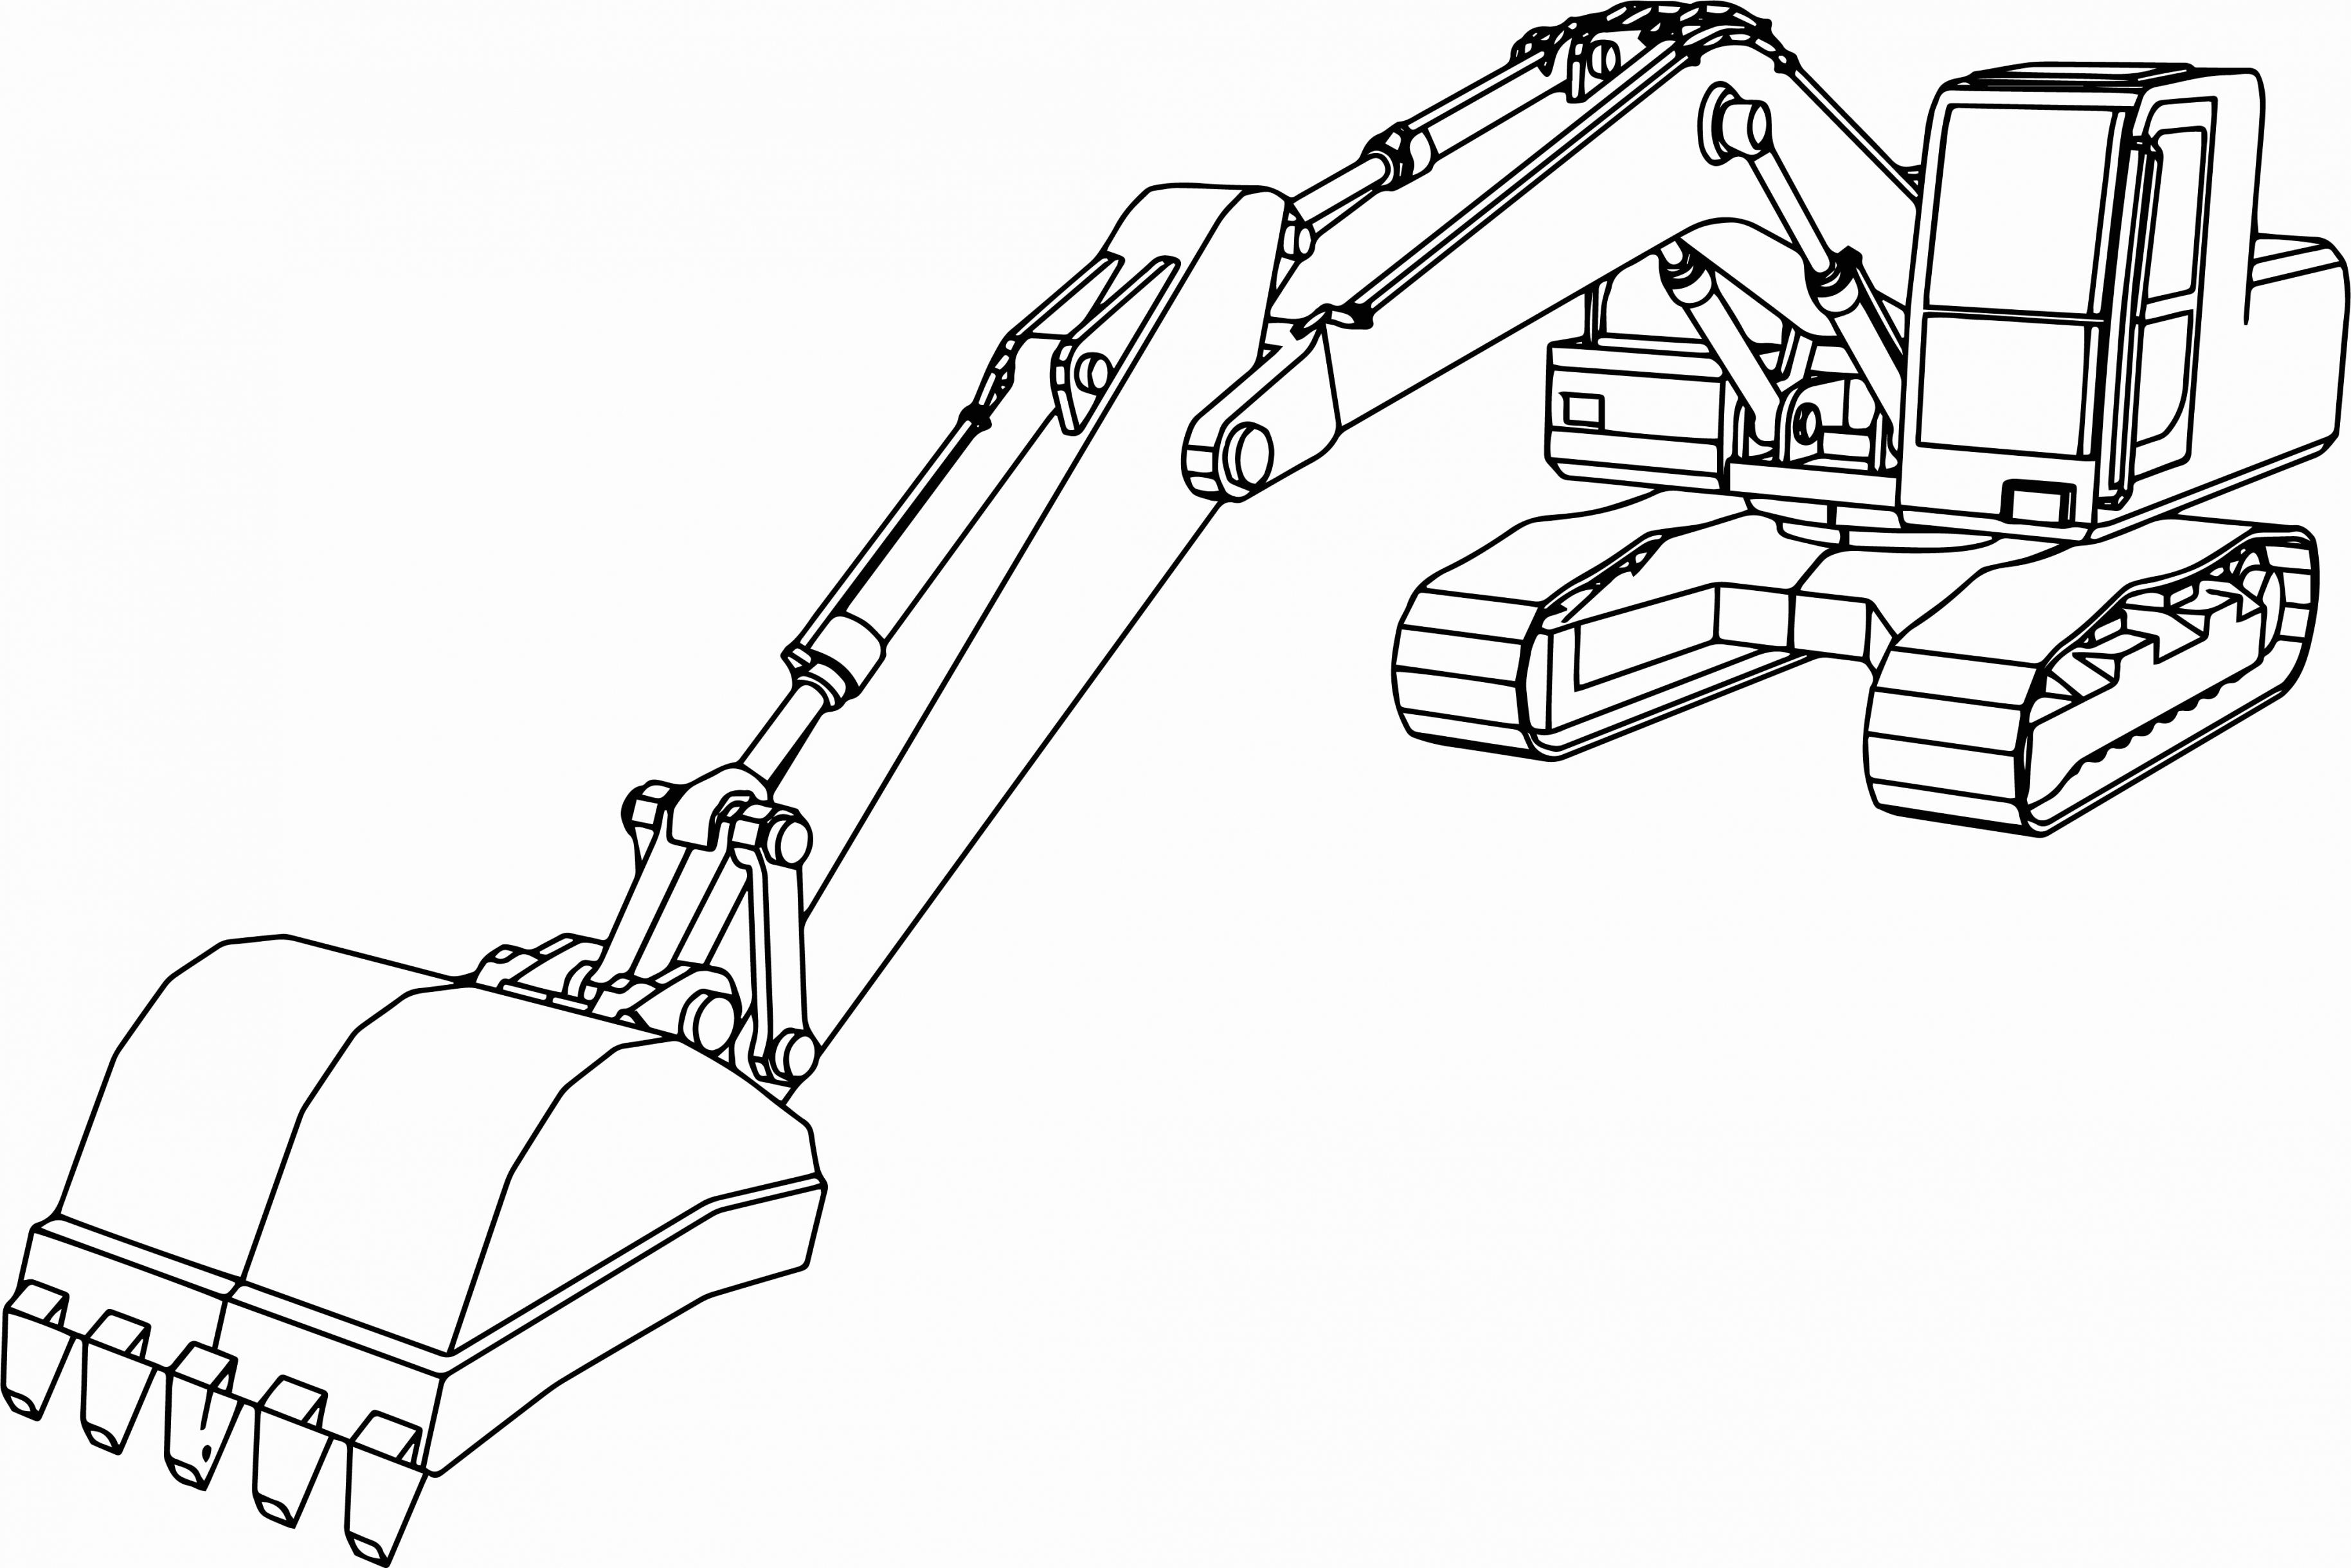 Excavator Coloring Pages   Coloring Home